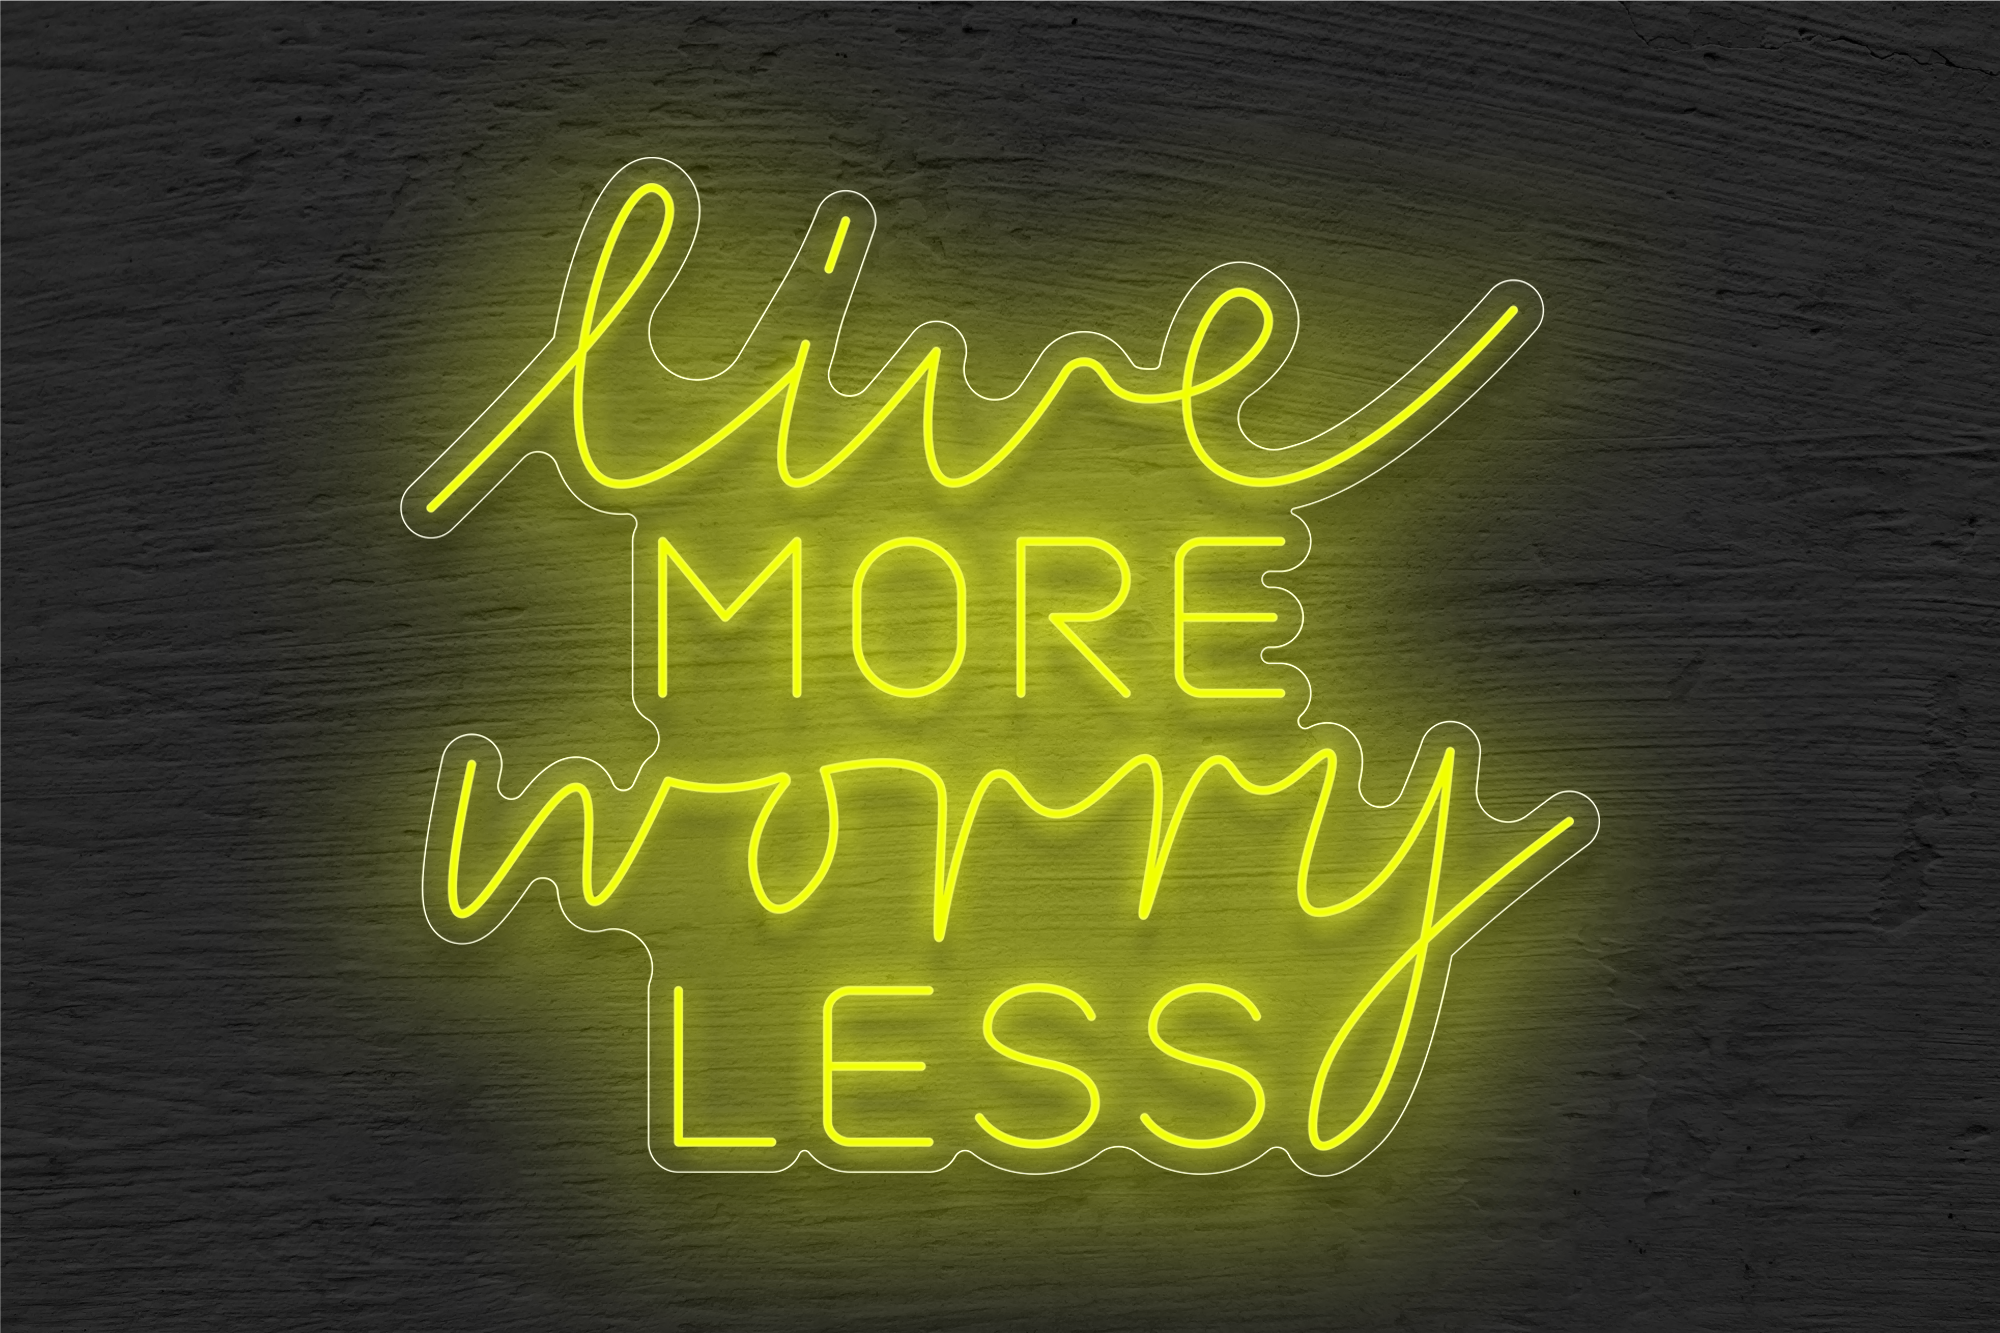 "Live More Worry Less" LED Neon Sign